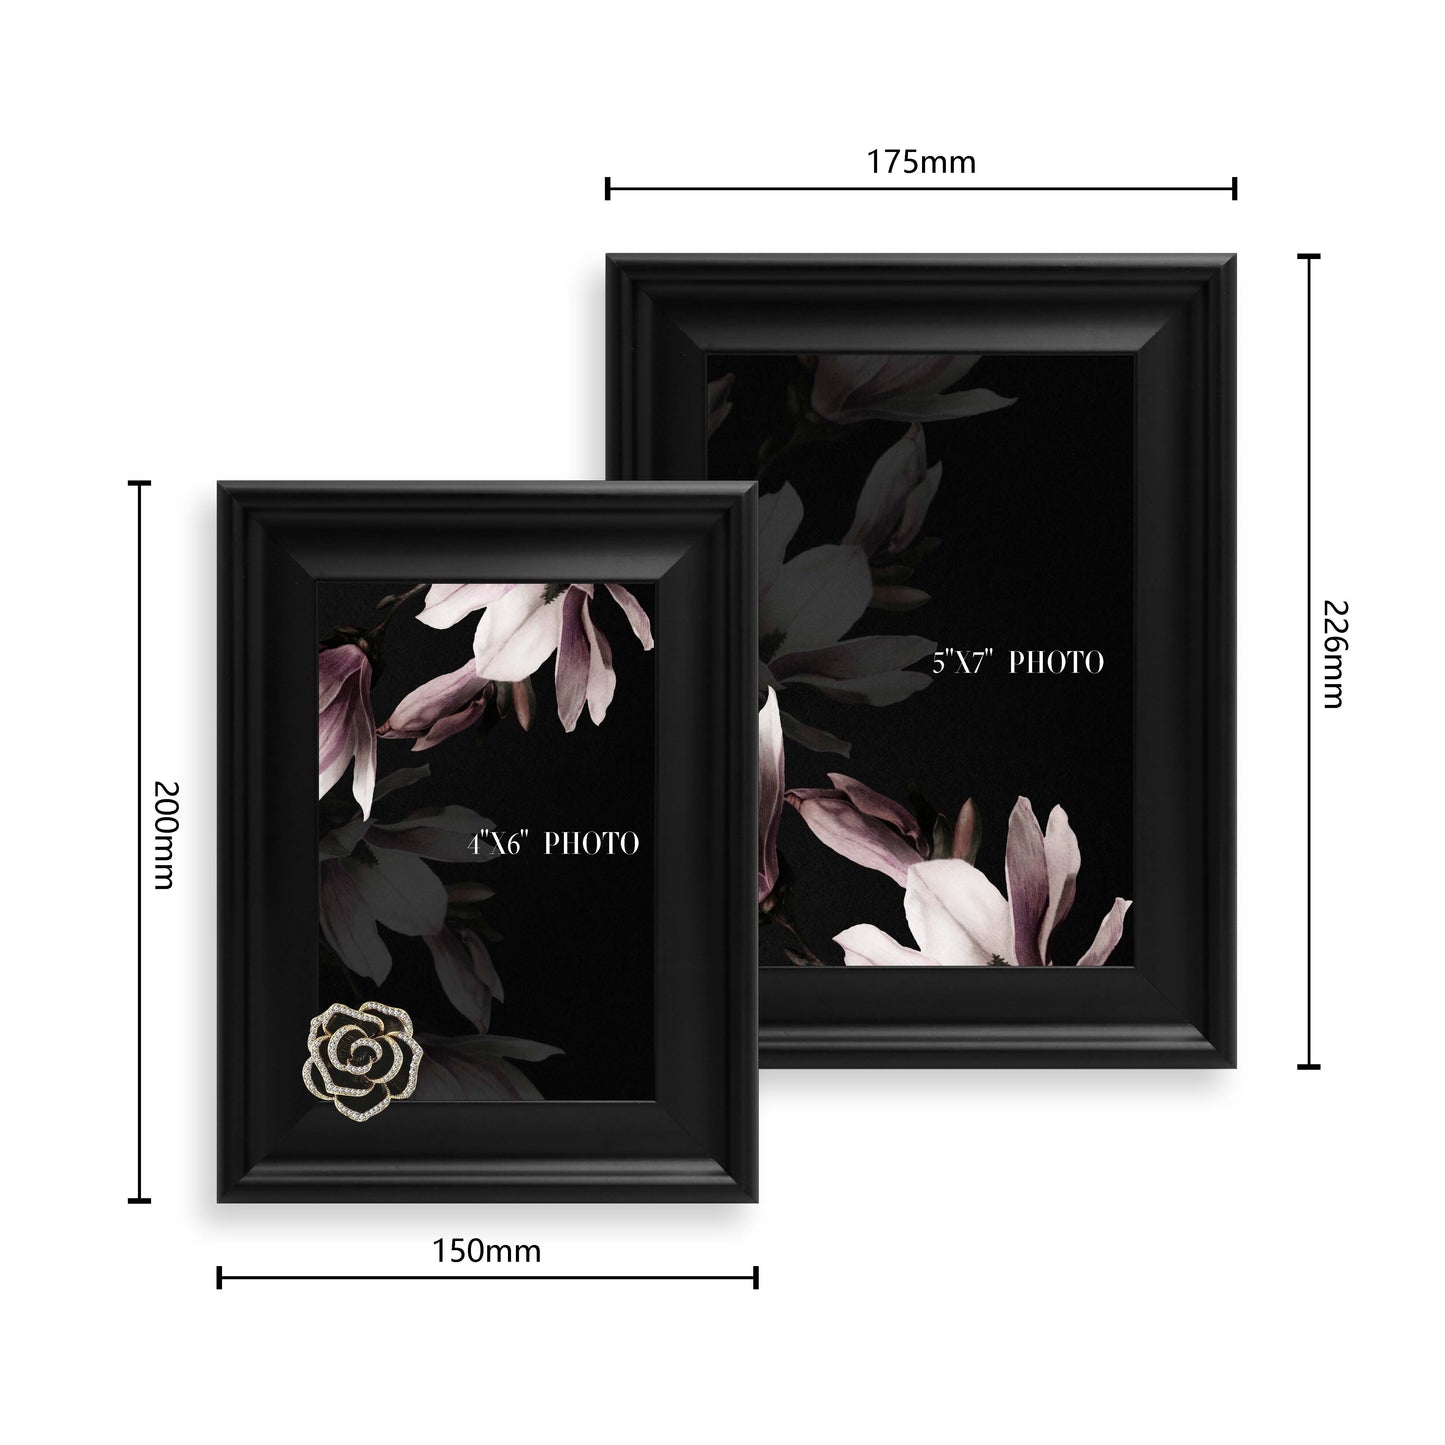 Dotride 5x7 & 4x6 Picture Frame with a Decoration 2 Pack, Photo Frame with a Detachable Flowers Ornament for Wall and Tabletop Display, Wood Phoframe with Acrylic Panel, Black